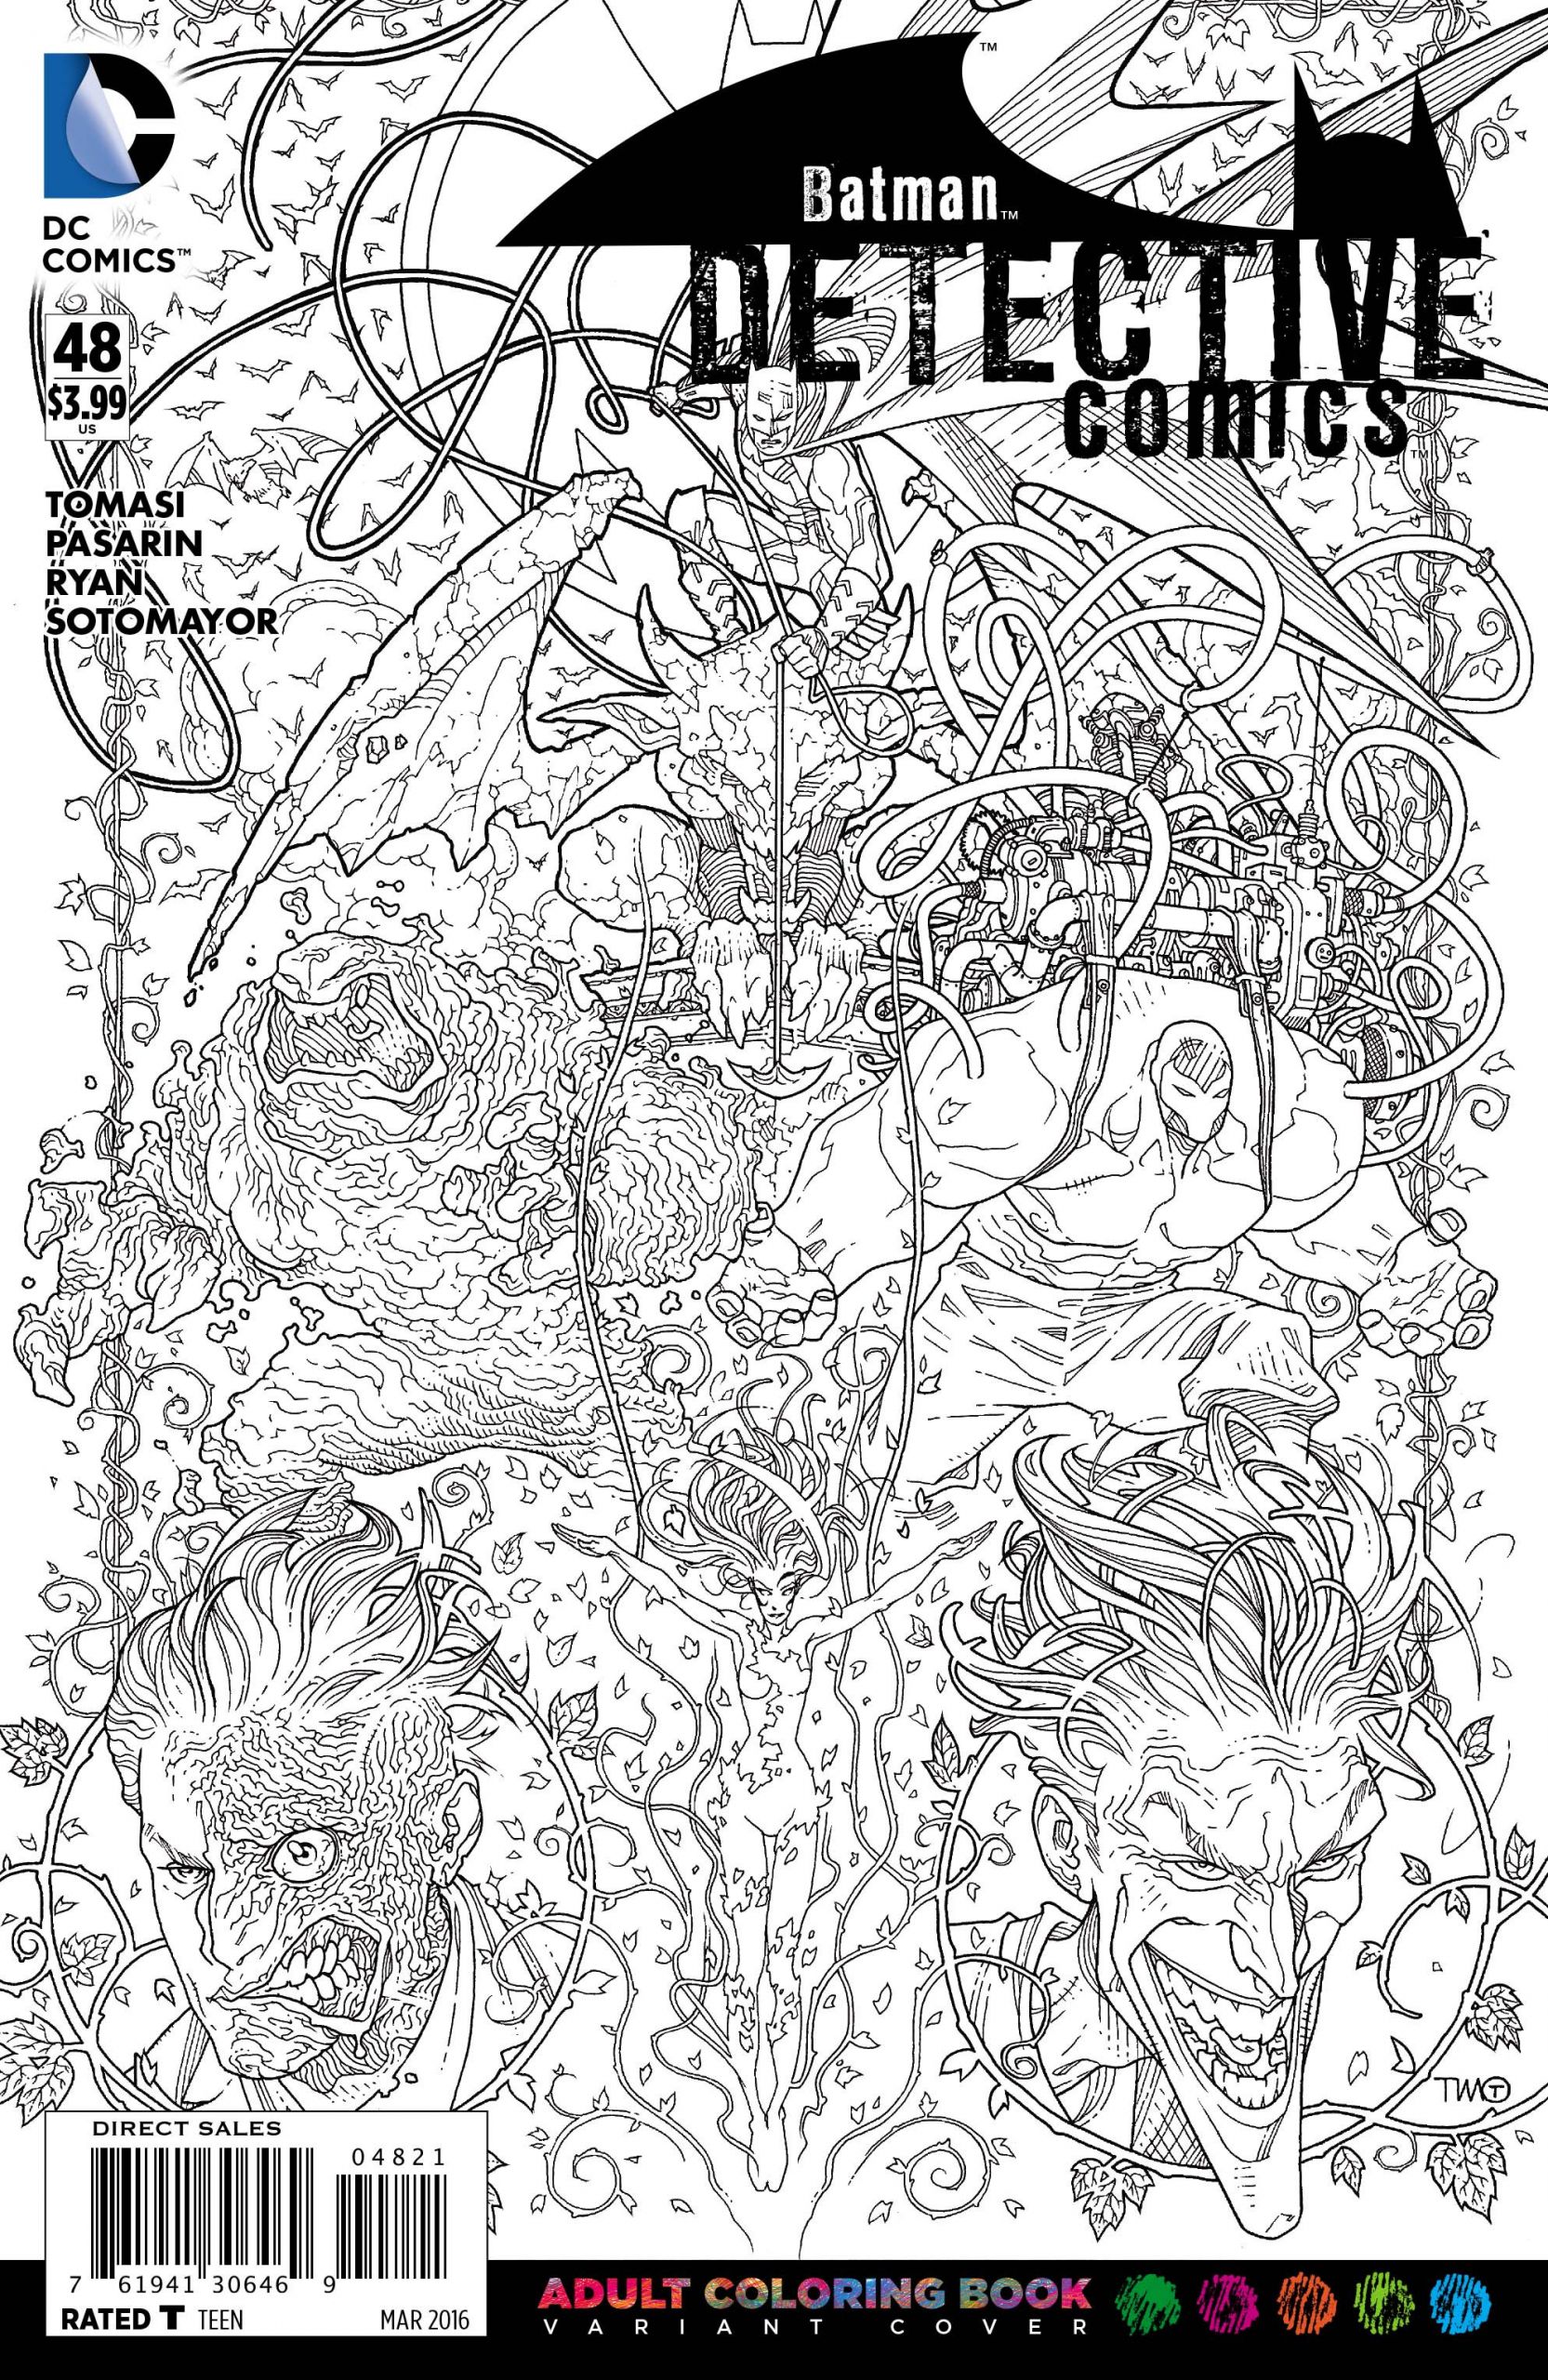 Dc Comics Adult Coloring Book
 Try These DC Adult Coloring Book Variant Covers GeekMom